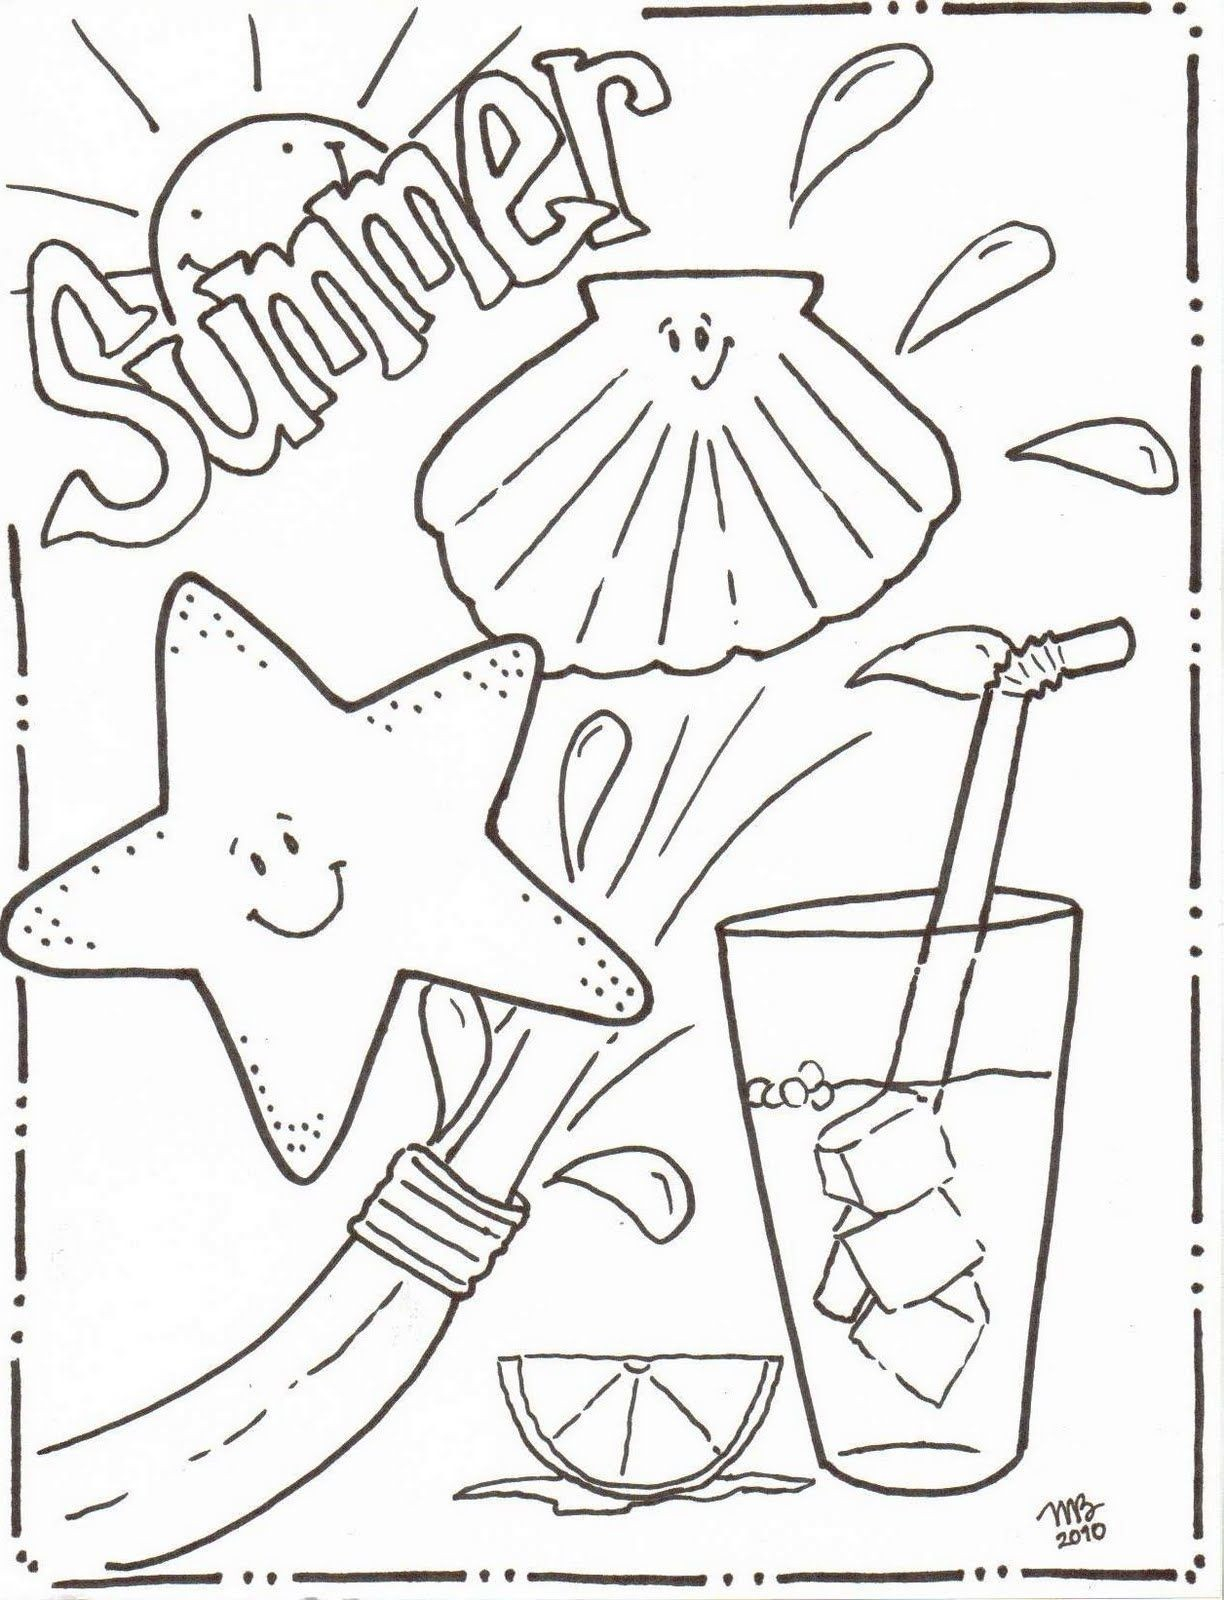 Summer Safety Coloring Pages Inspirational Sumer Coloring Pages Built Imagination With Coloring